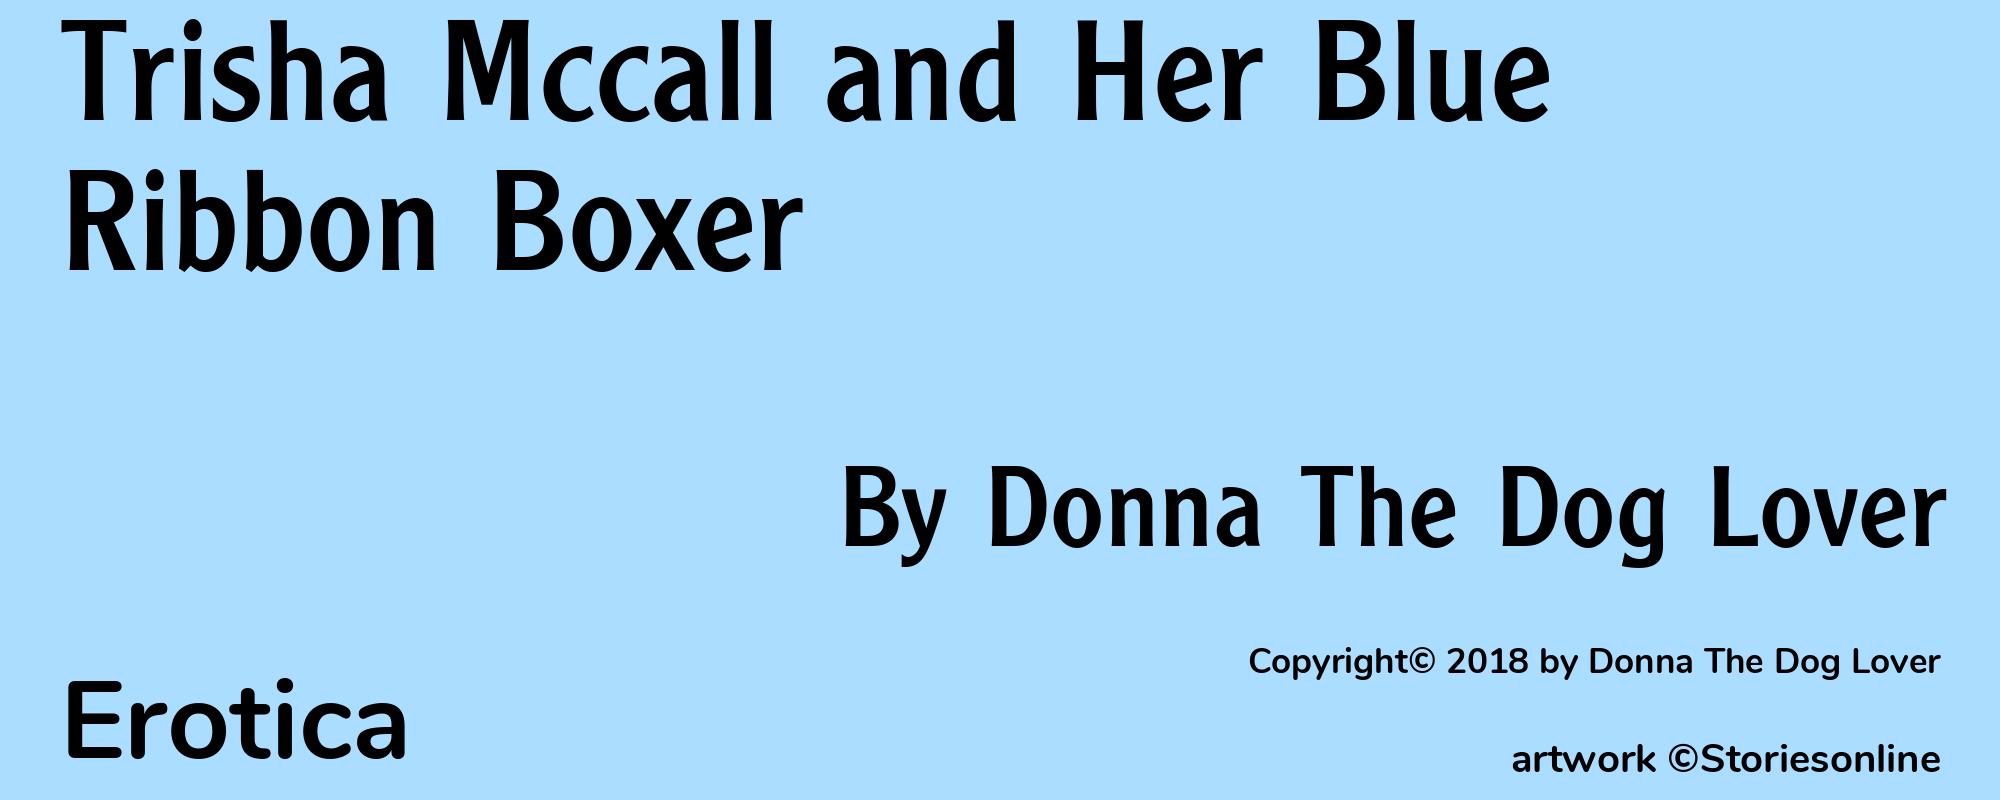 Trisha Mccall and Her Blue Ribbon Boxer - Cover